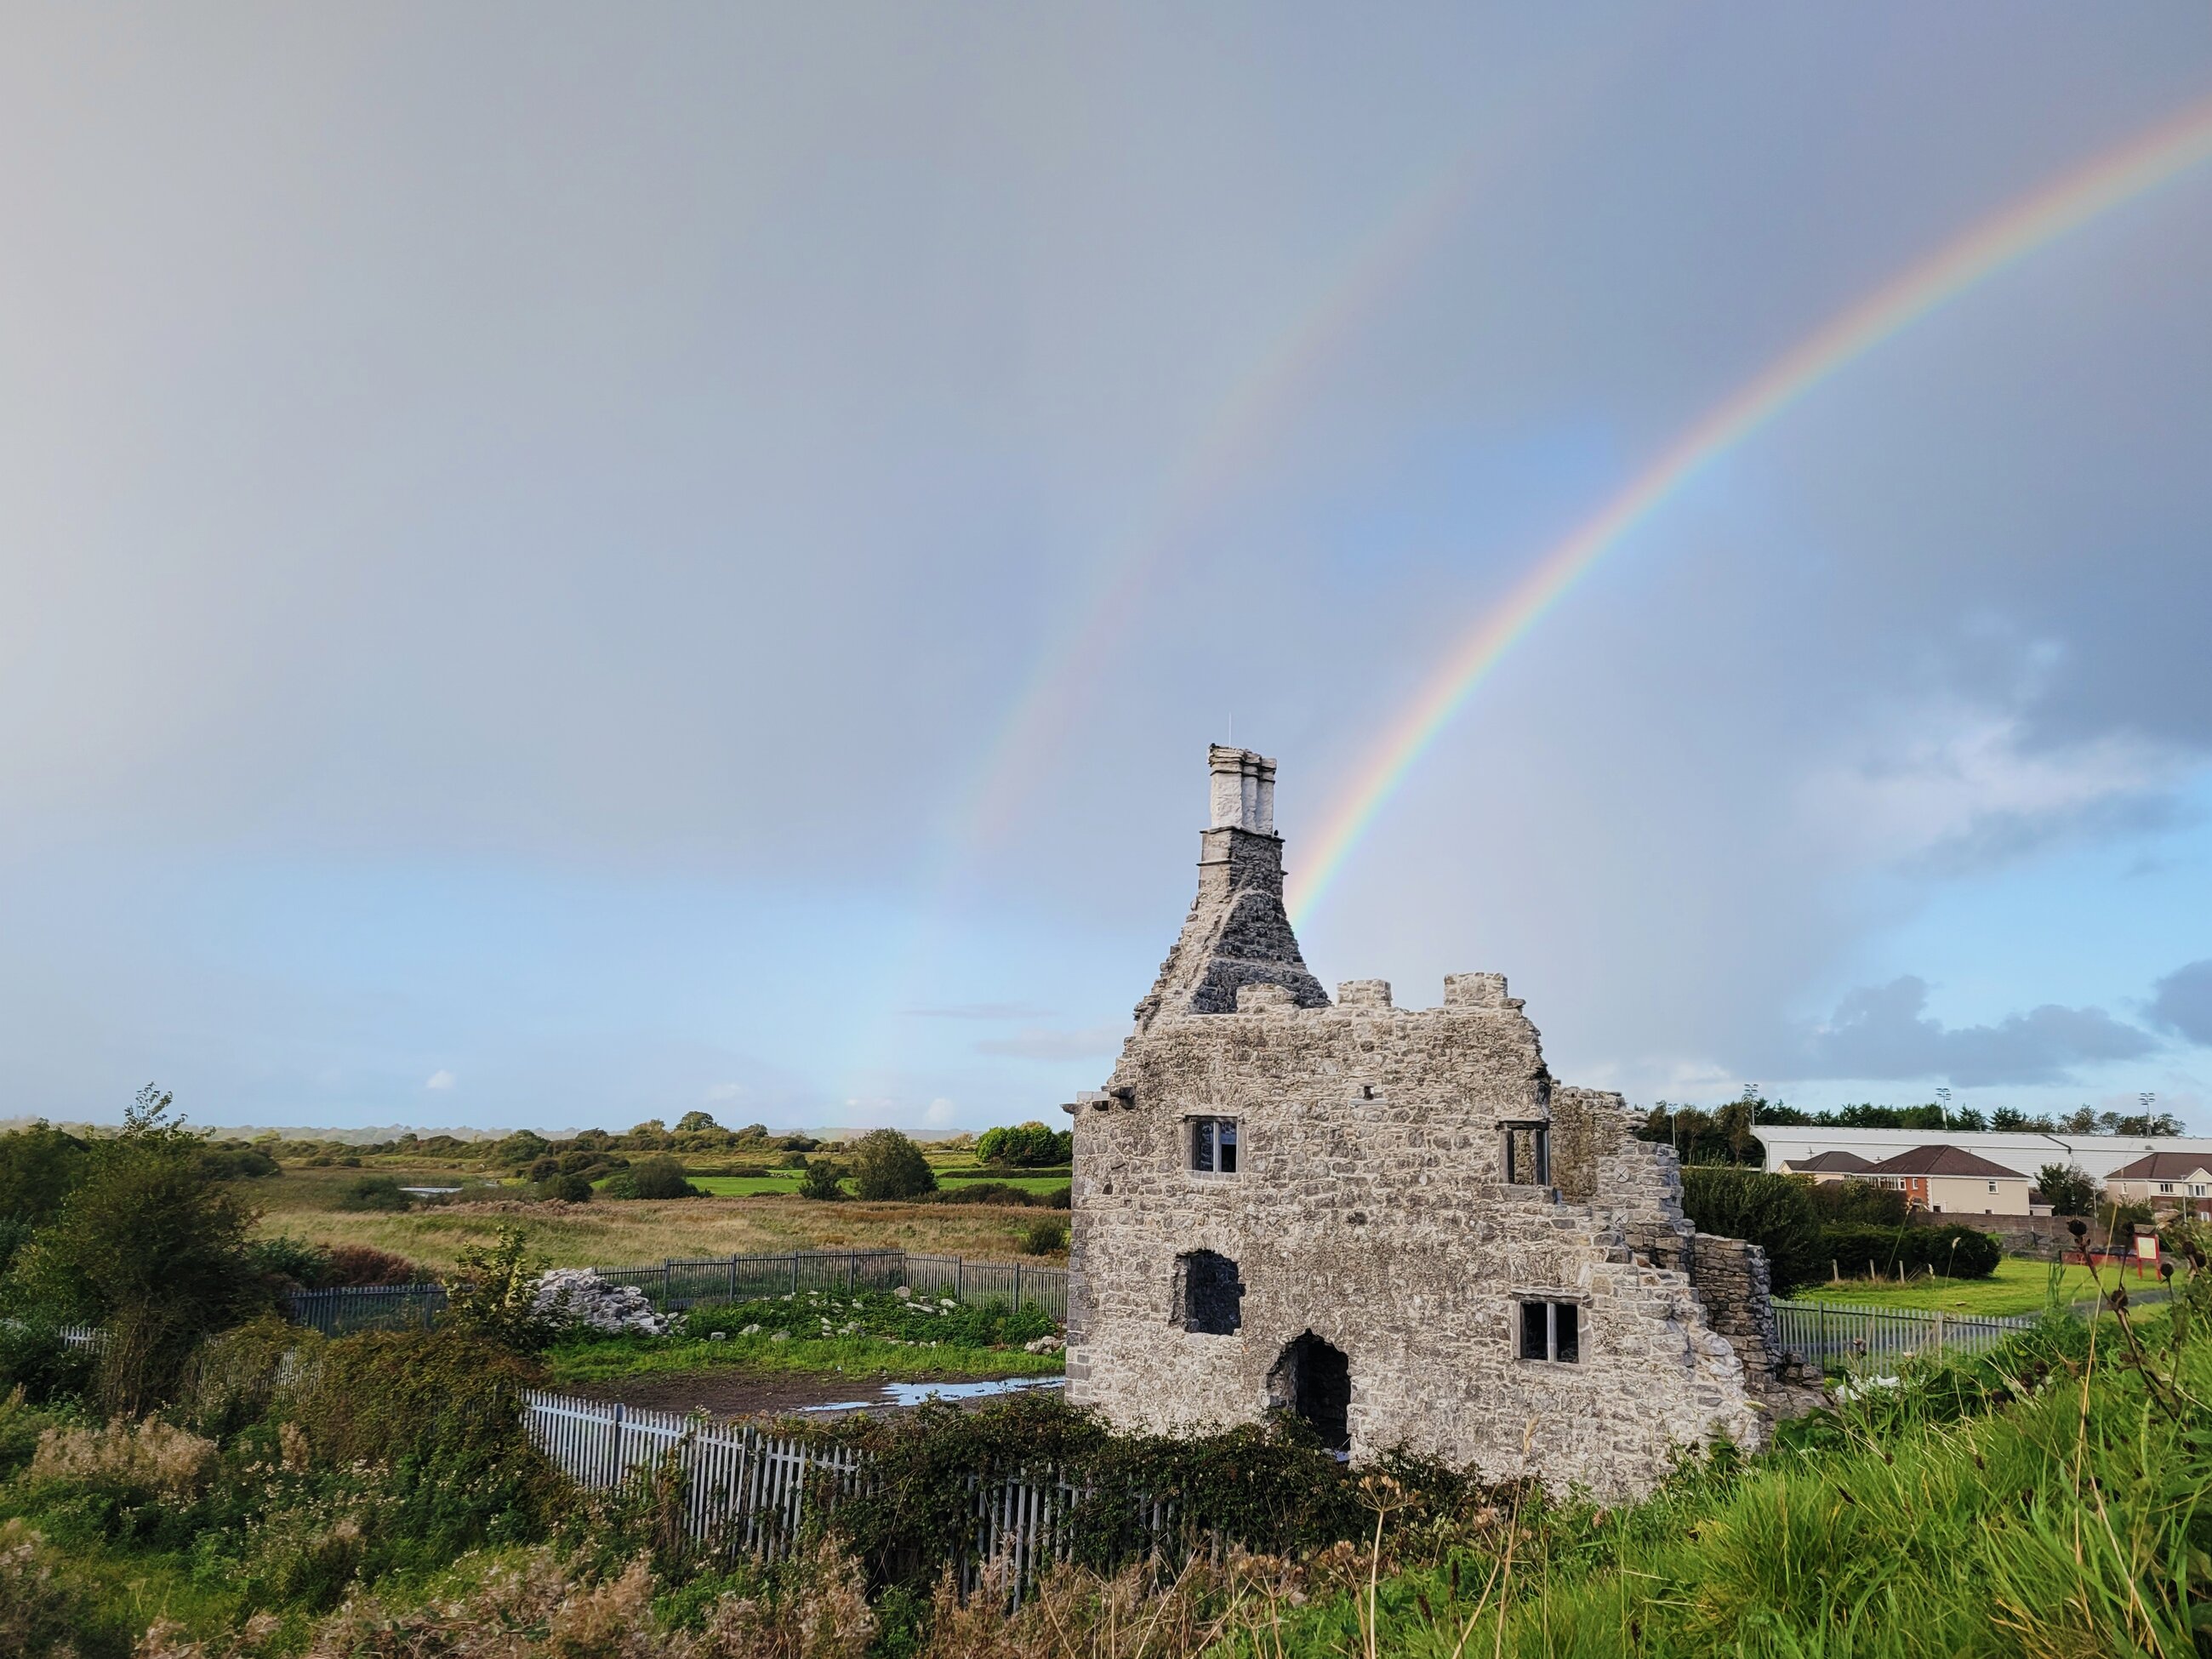 Double rainbow over castle ruins in Galway